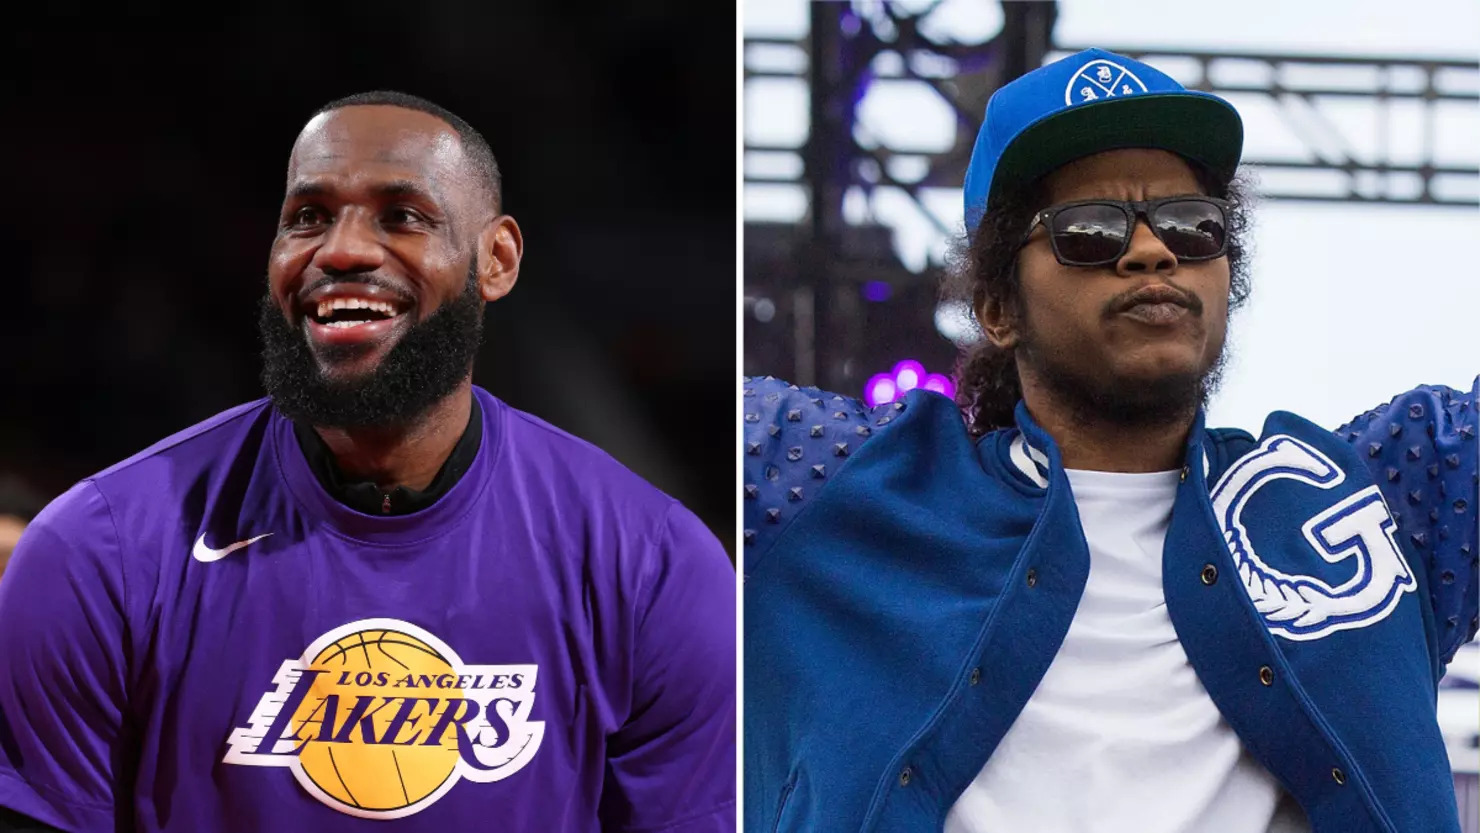 Lebron James Is Called By Ab-Soul To A&R His Next Album